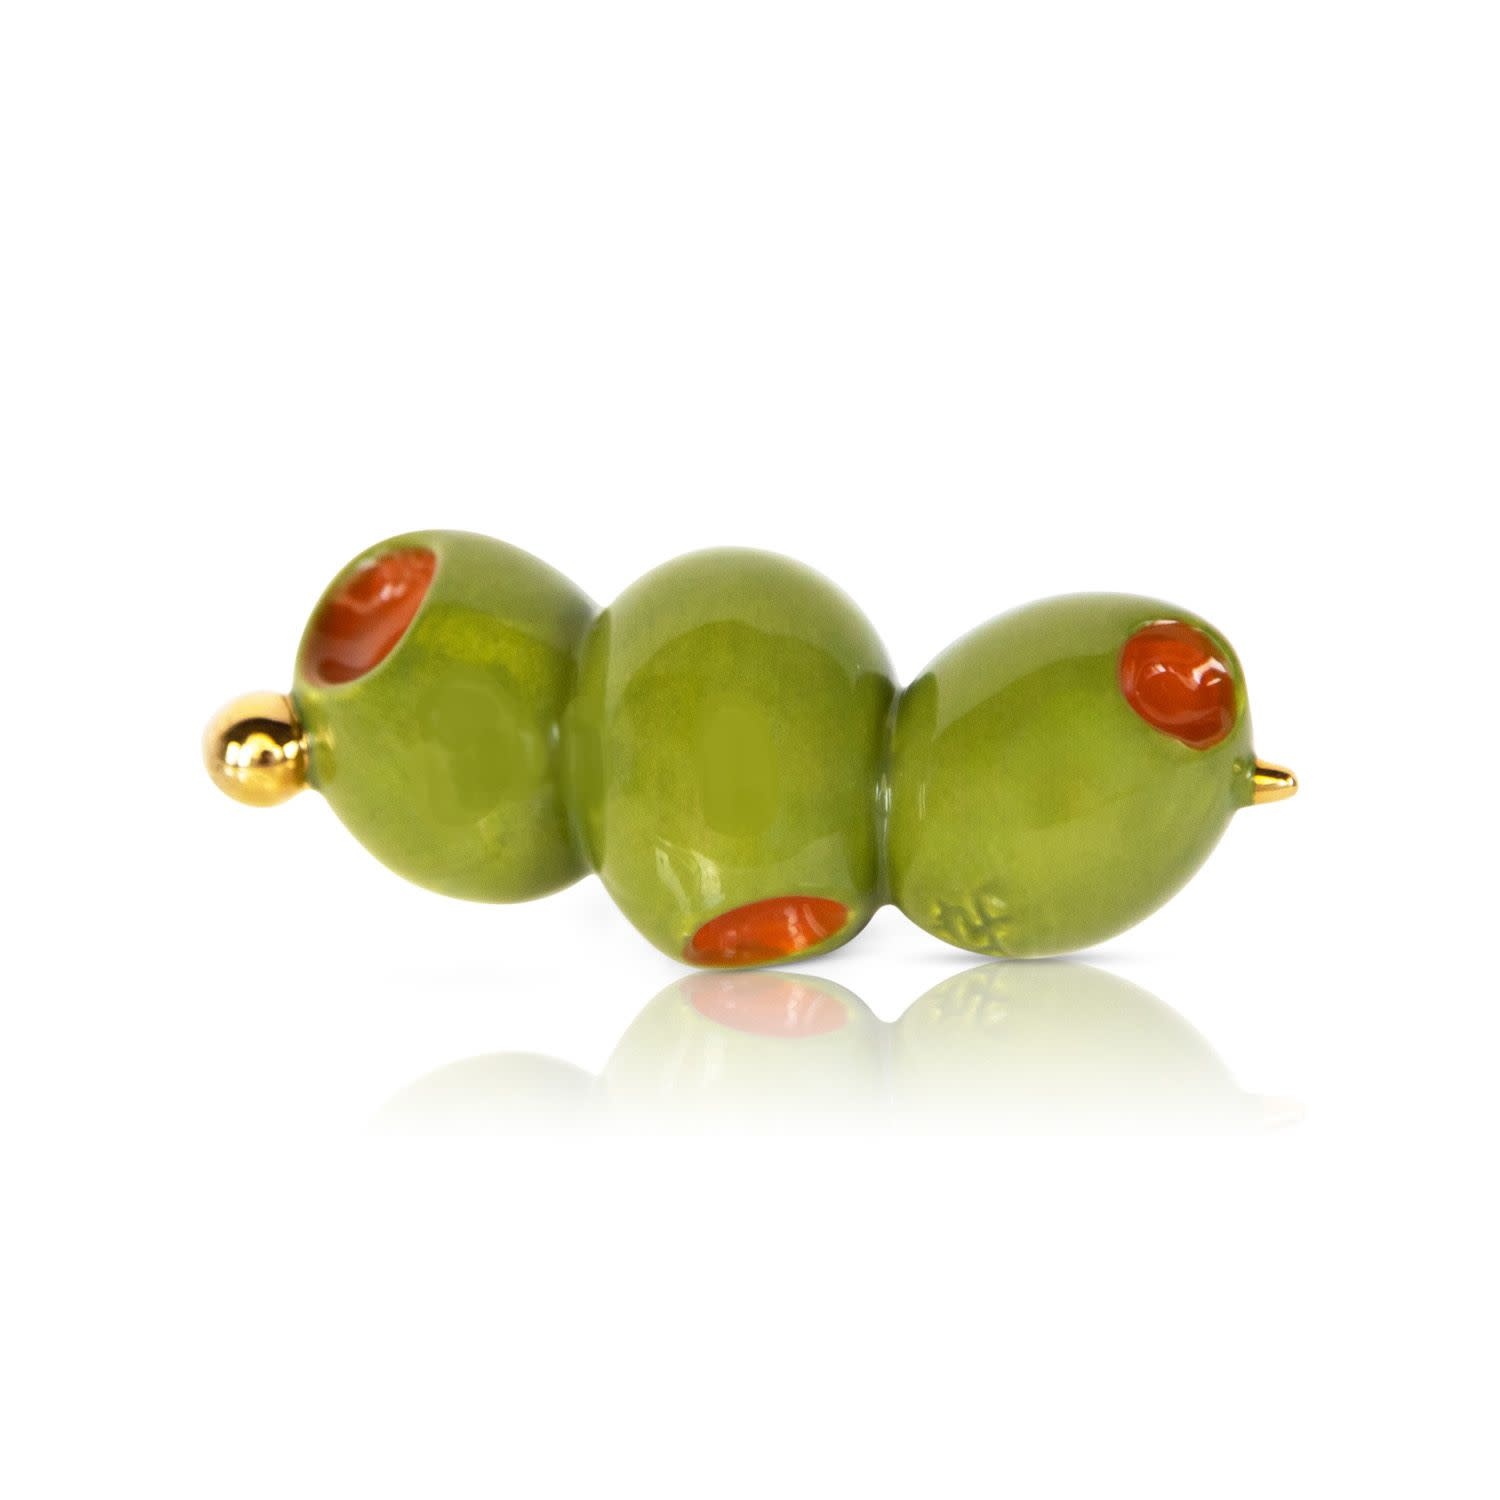 nora fleming olive you so much mini A406 (green olives garnish)